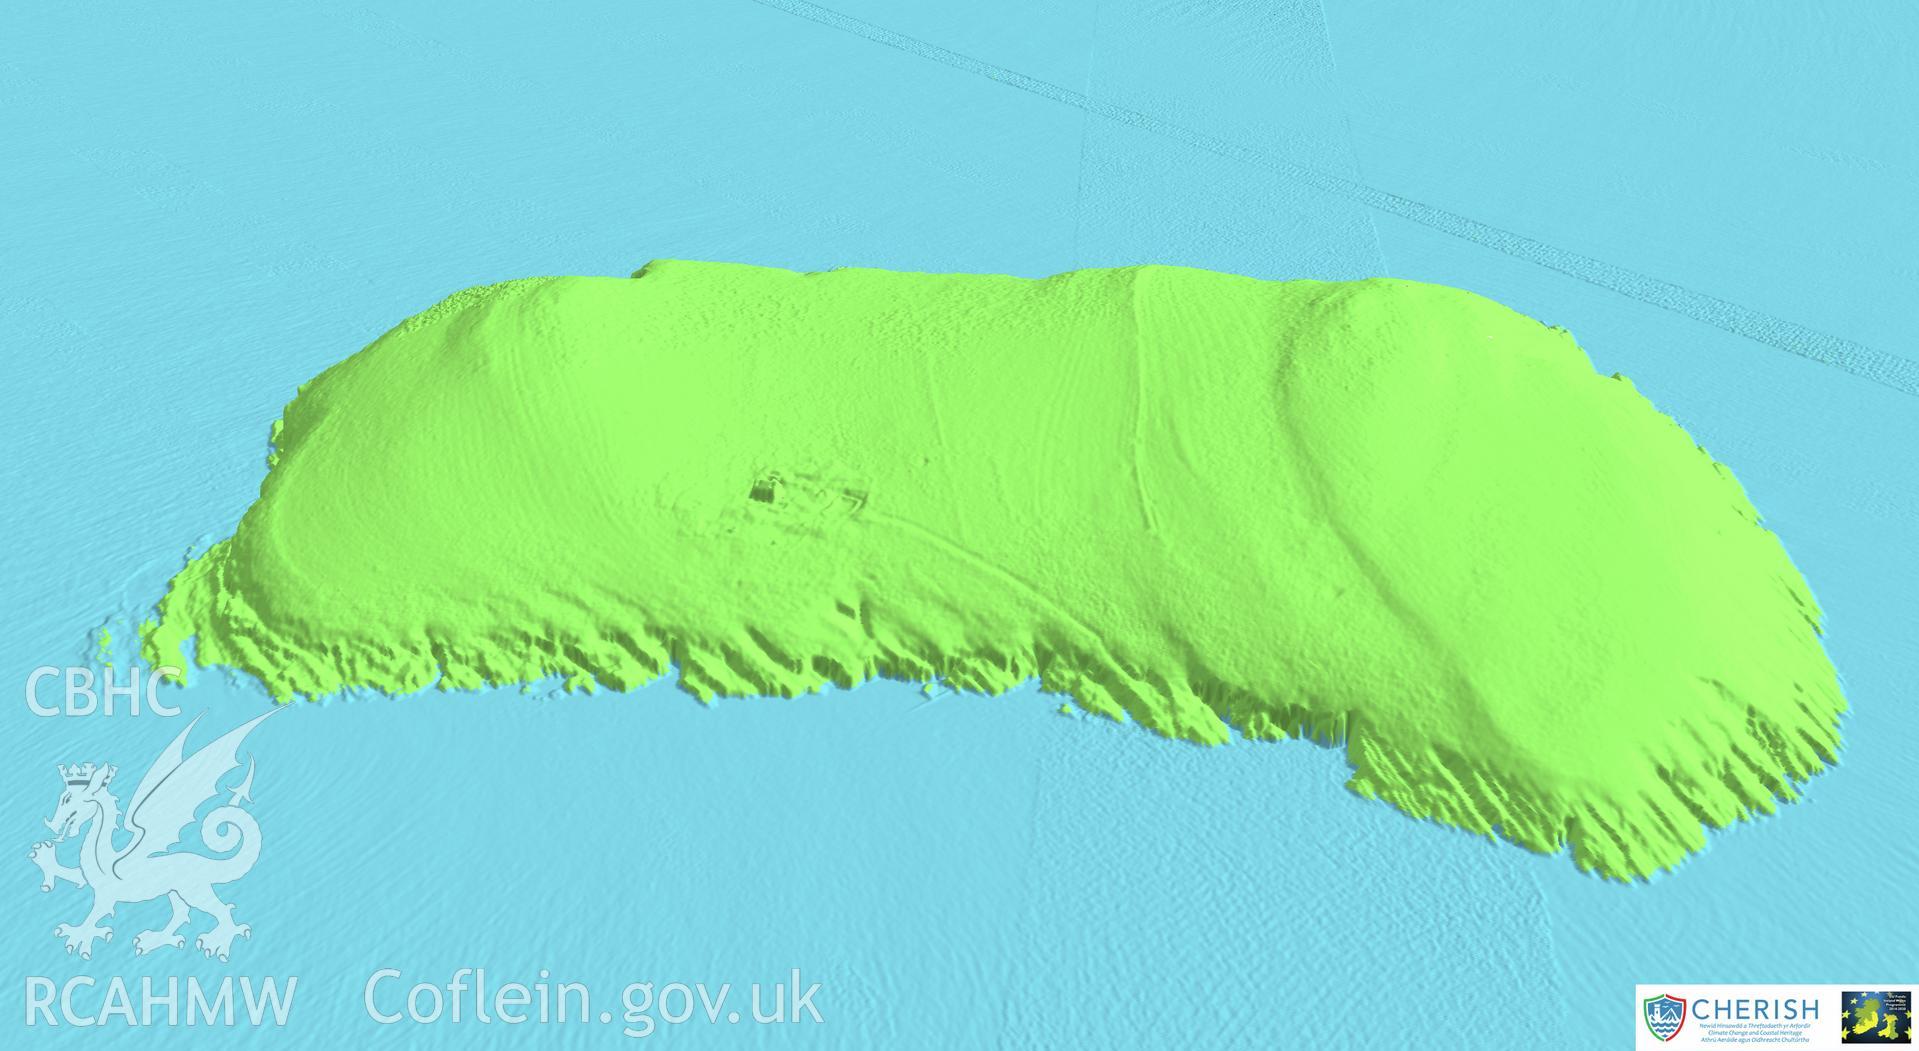 Ynysoedd Tudwal (St. Tudwal?s Islands). Airborne laser scanning (LiDAR) commissioned by the CHERISH Project 2017-2021, flown by Bluesky International LTD at low tide on 24th February 2017. View showing the east island facing south-west.